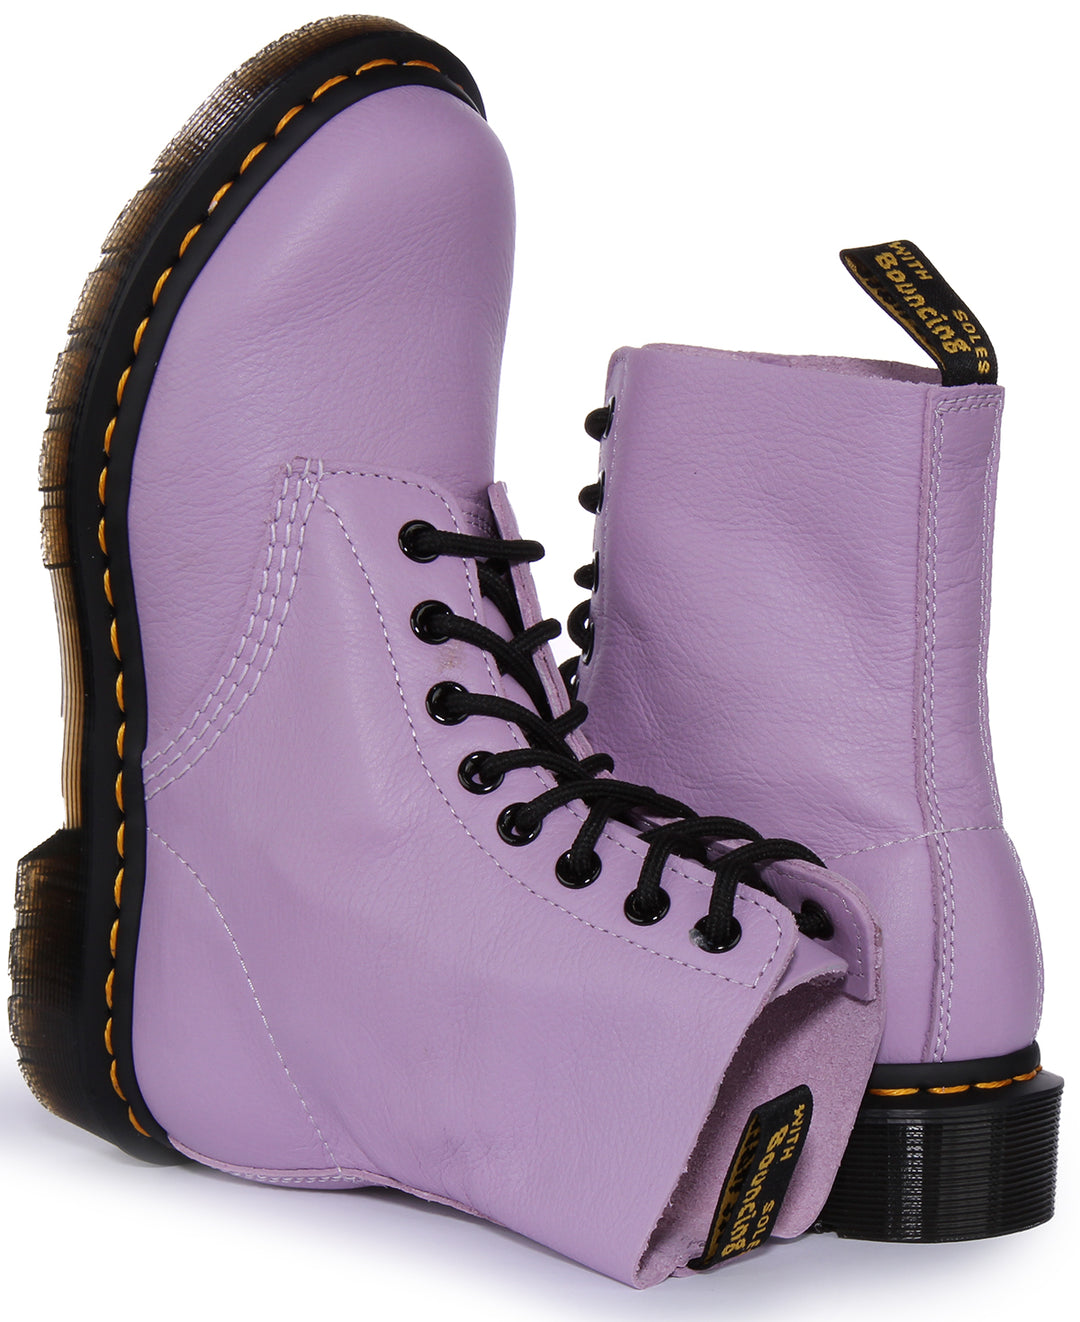 Dr Martens 1460 Pascal In Lilac For Women